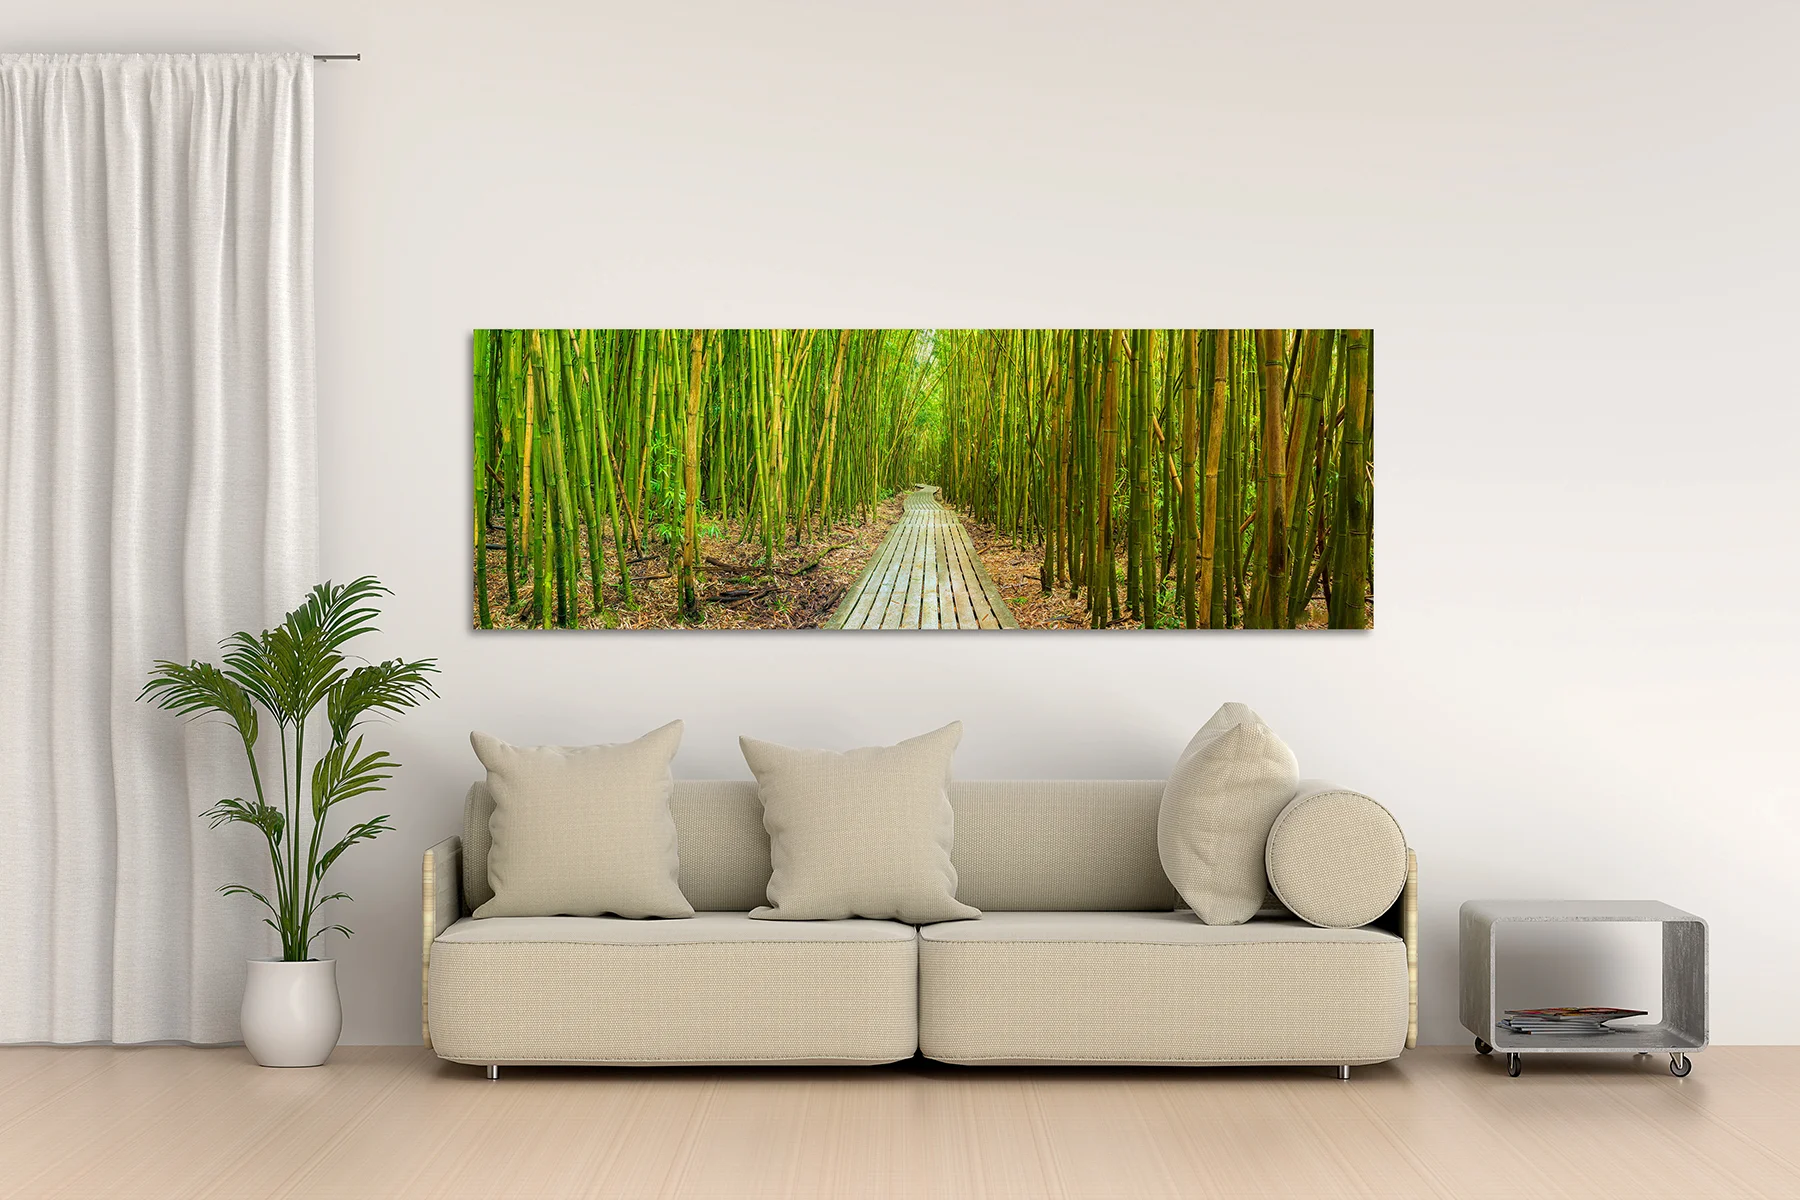 A bamboo forest wall art in on a living room wall above a sofa - Gintchin Fine Art